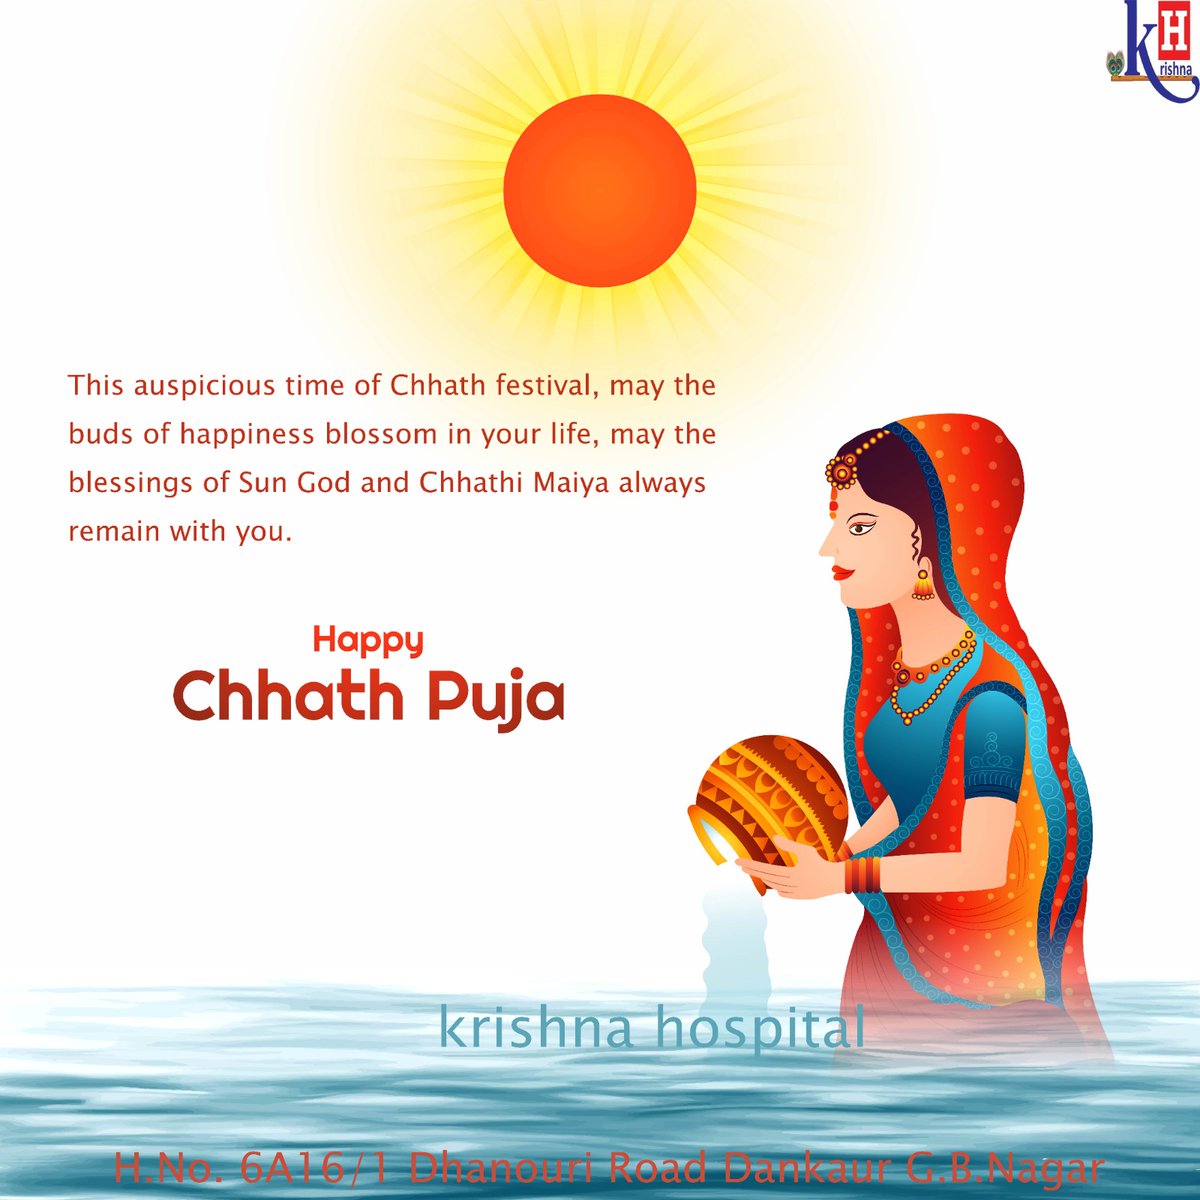 On the occasion of Chaat Puja, may the light of the diyas guide you on the path of success and happiness. Happy Chaat Puja
#ChaatPuja
#FestiveCelebration
#BlessingsAndJoy
#CulturalTradition
#ChhathPuja
#FestivalMoments
#PrayersAndBlessings
#ChaatPujaVibes
#krishnahispitaldankaur